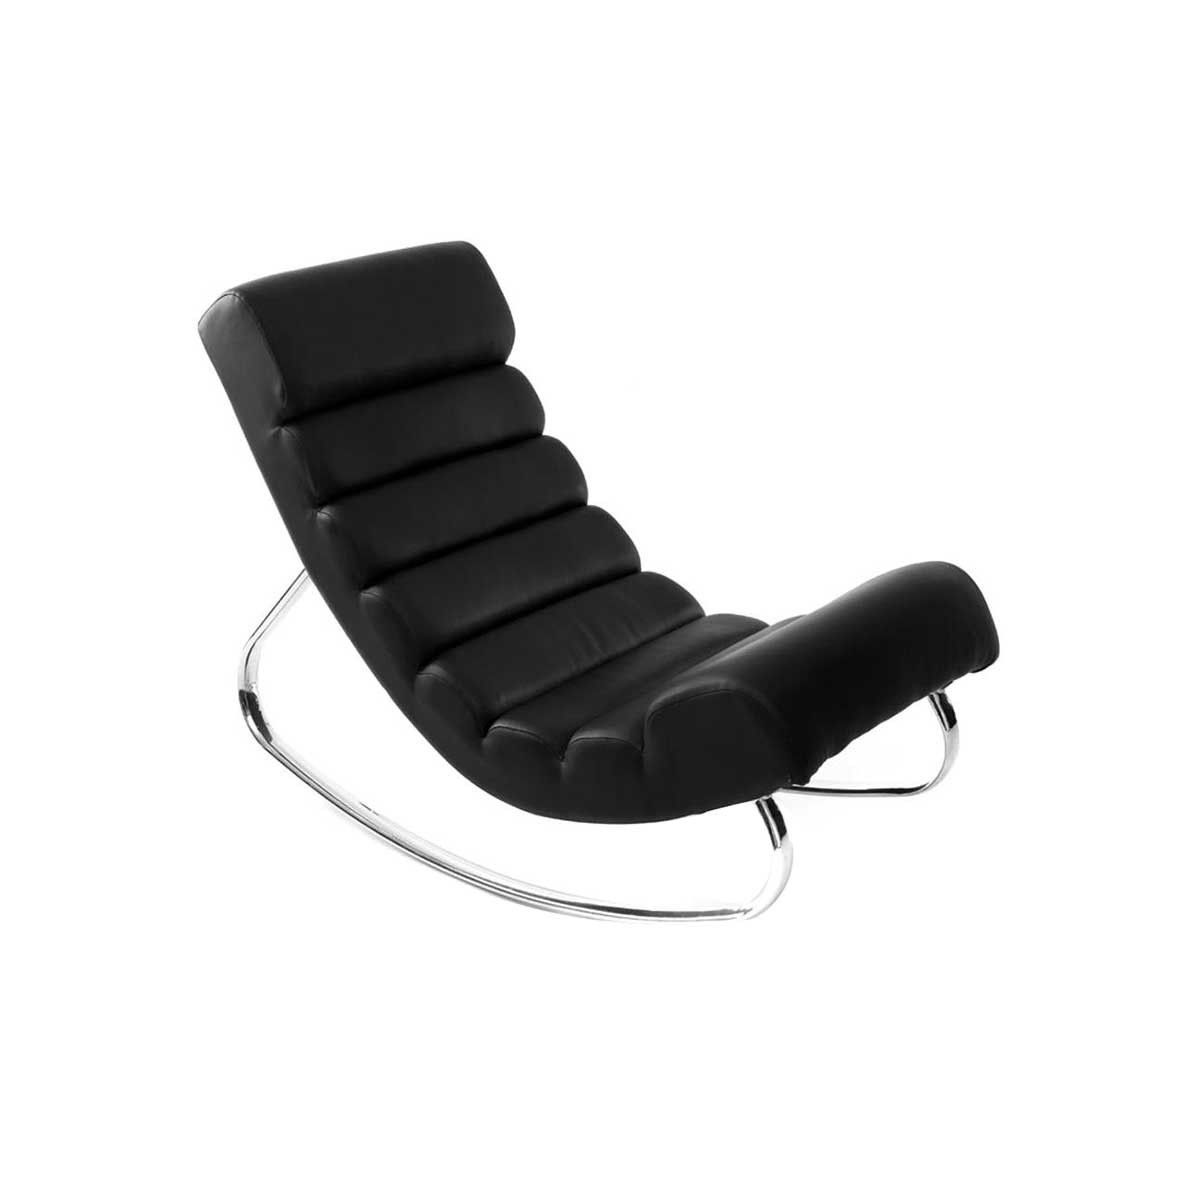 Rocking chair TAYLOR FAUTEUIL RELAX | La Redoute (FR)